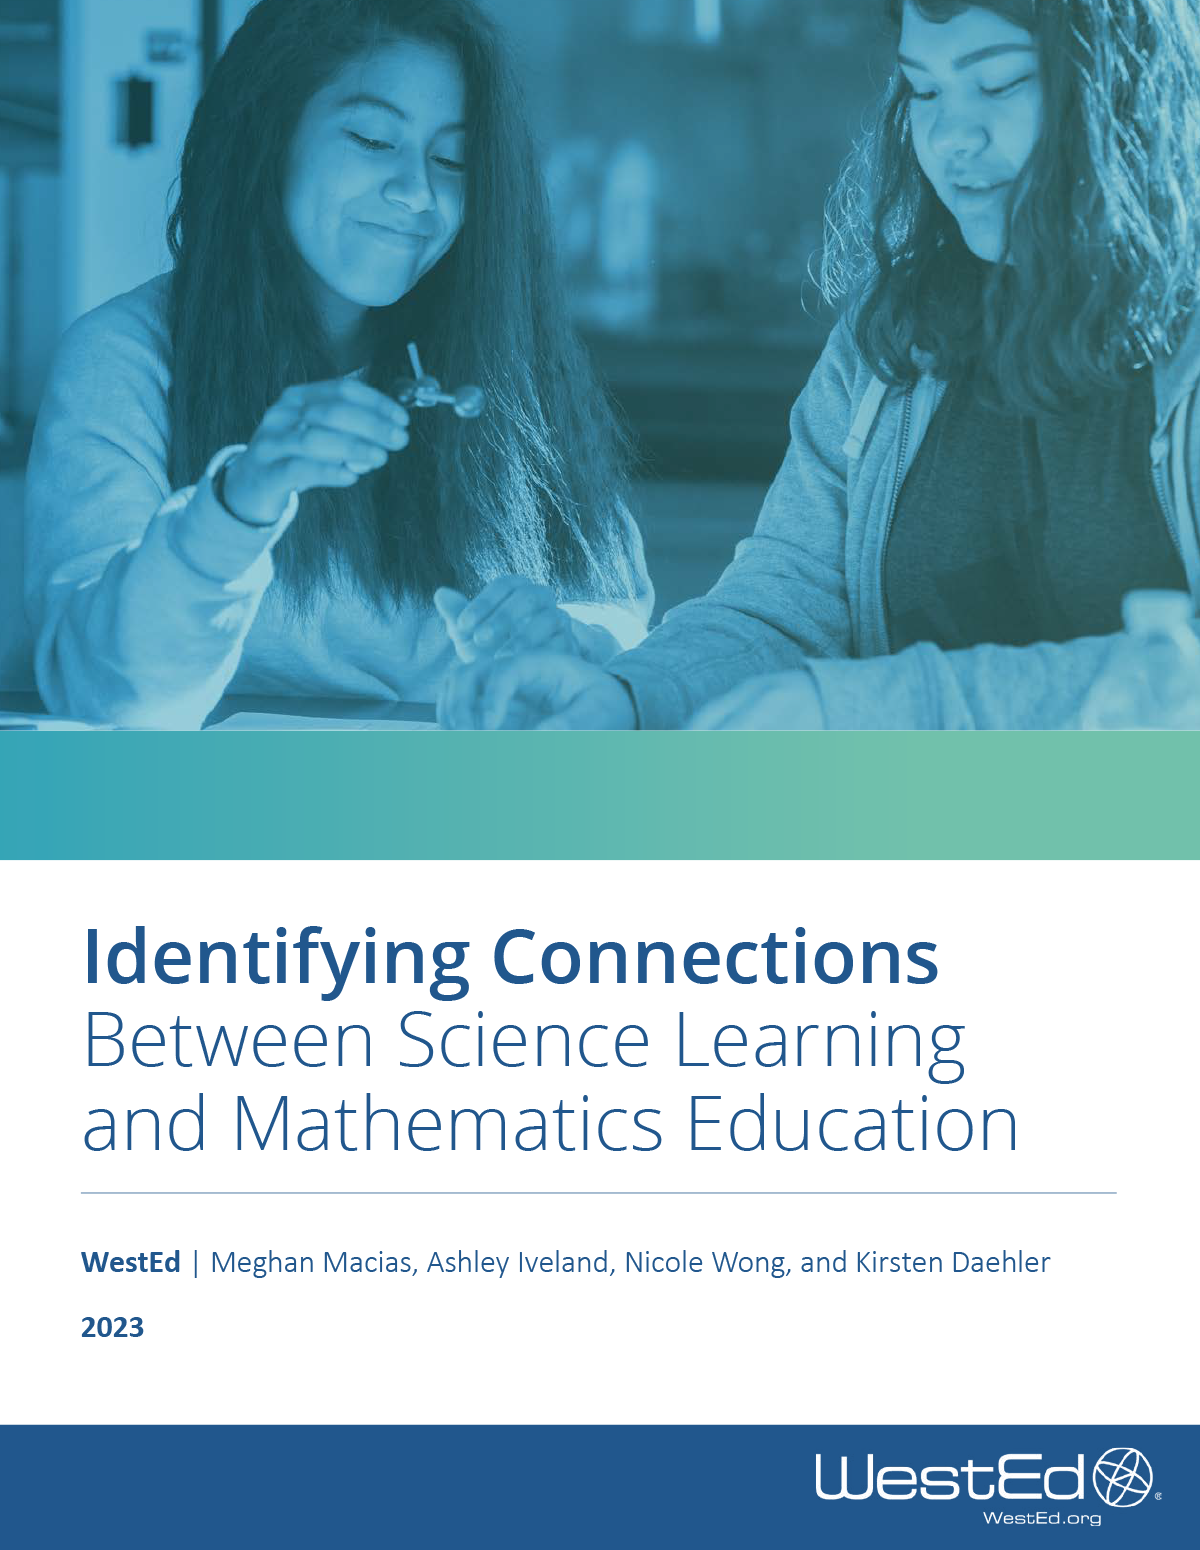 Identifying Connections: Between Science Learning and Mathematics Education